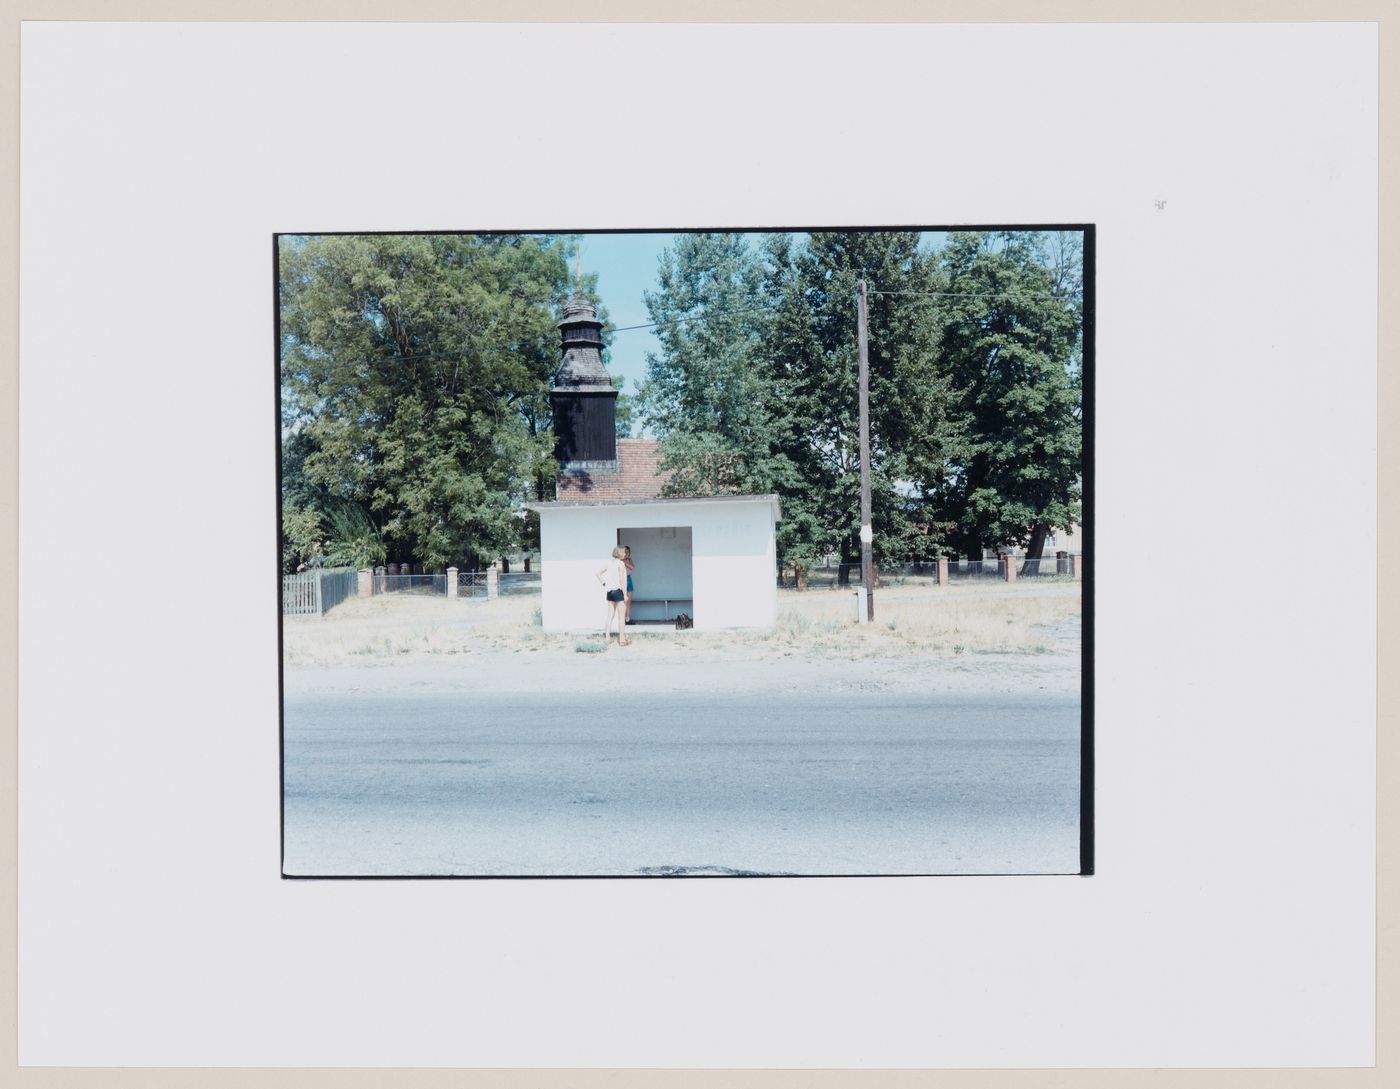 View of a bus shelter, a church tower, a road and people, Strzelce Kraje'nskie, Poland (from the series "In between cities")